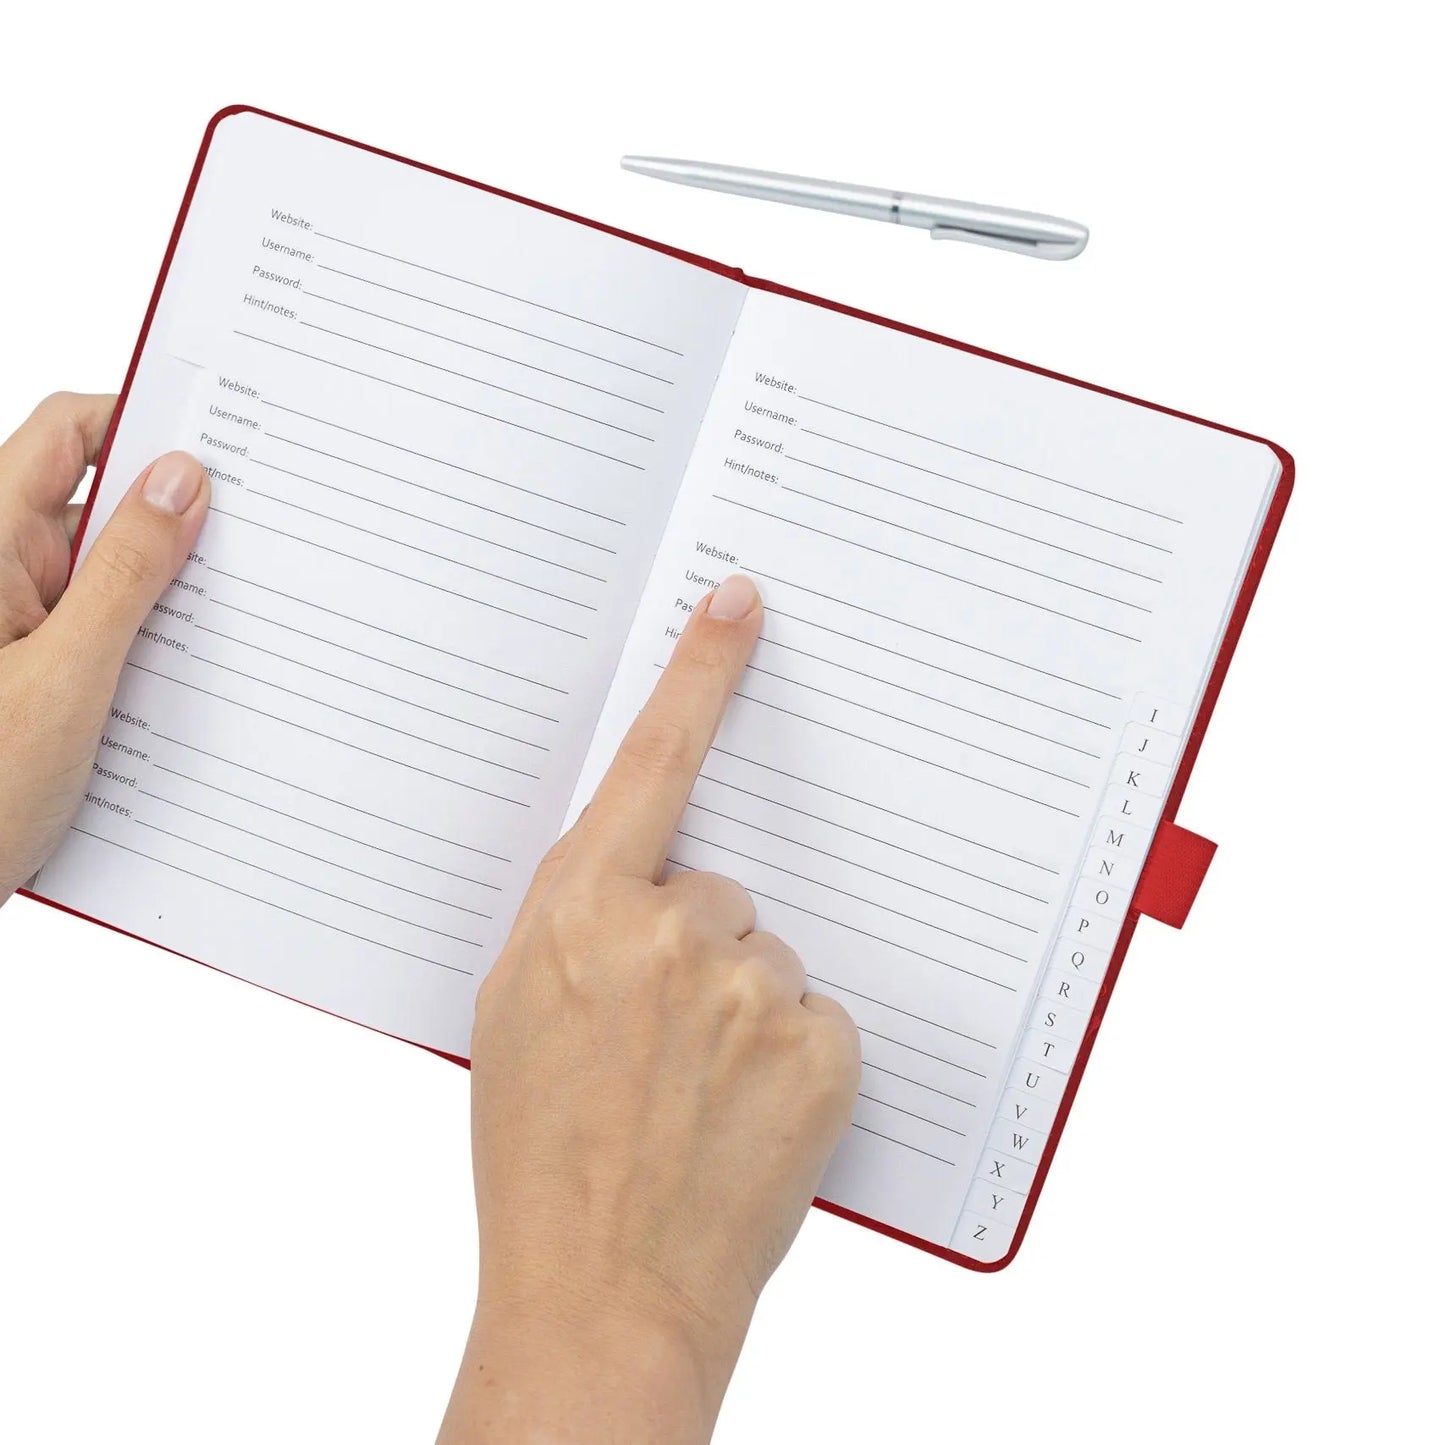 Ultimate Password & Username Organiser A-Z Index Tabbed Sections Red Hardcover Pen Included  Simplify and Secure Your Digital Life Keechi & co.